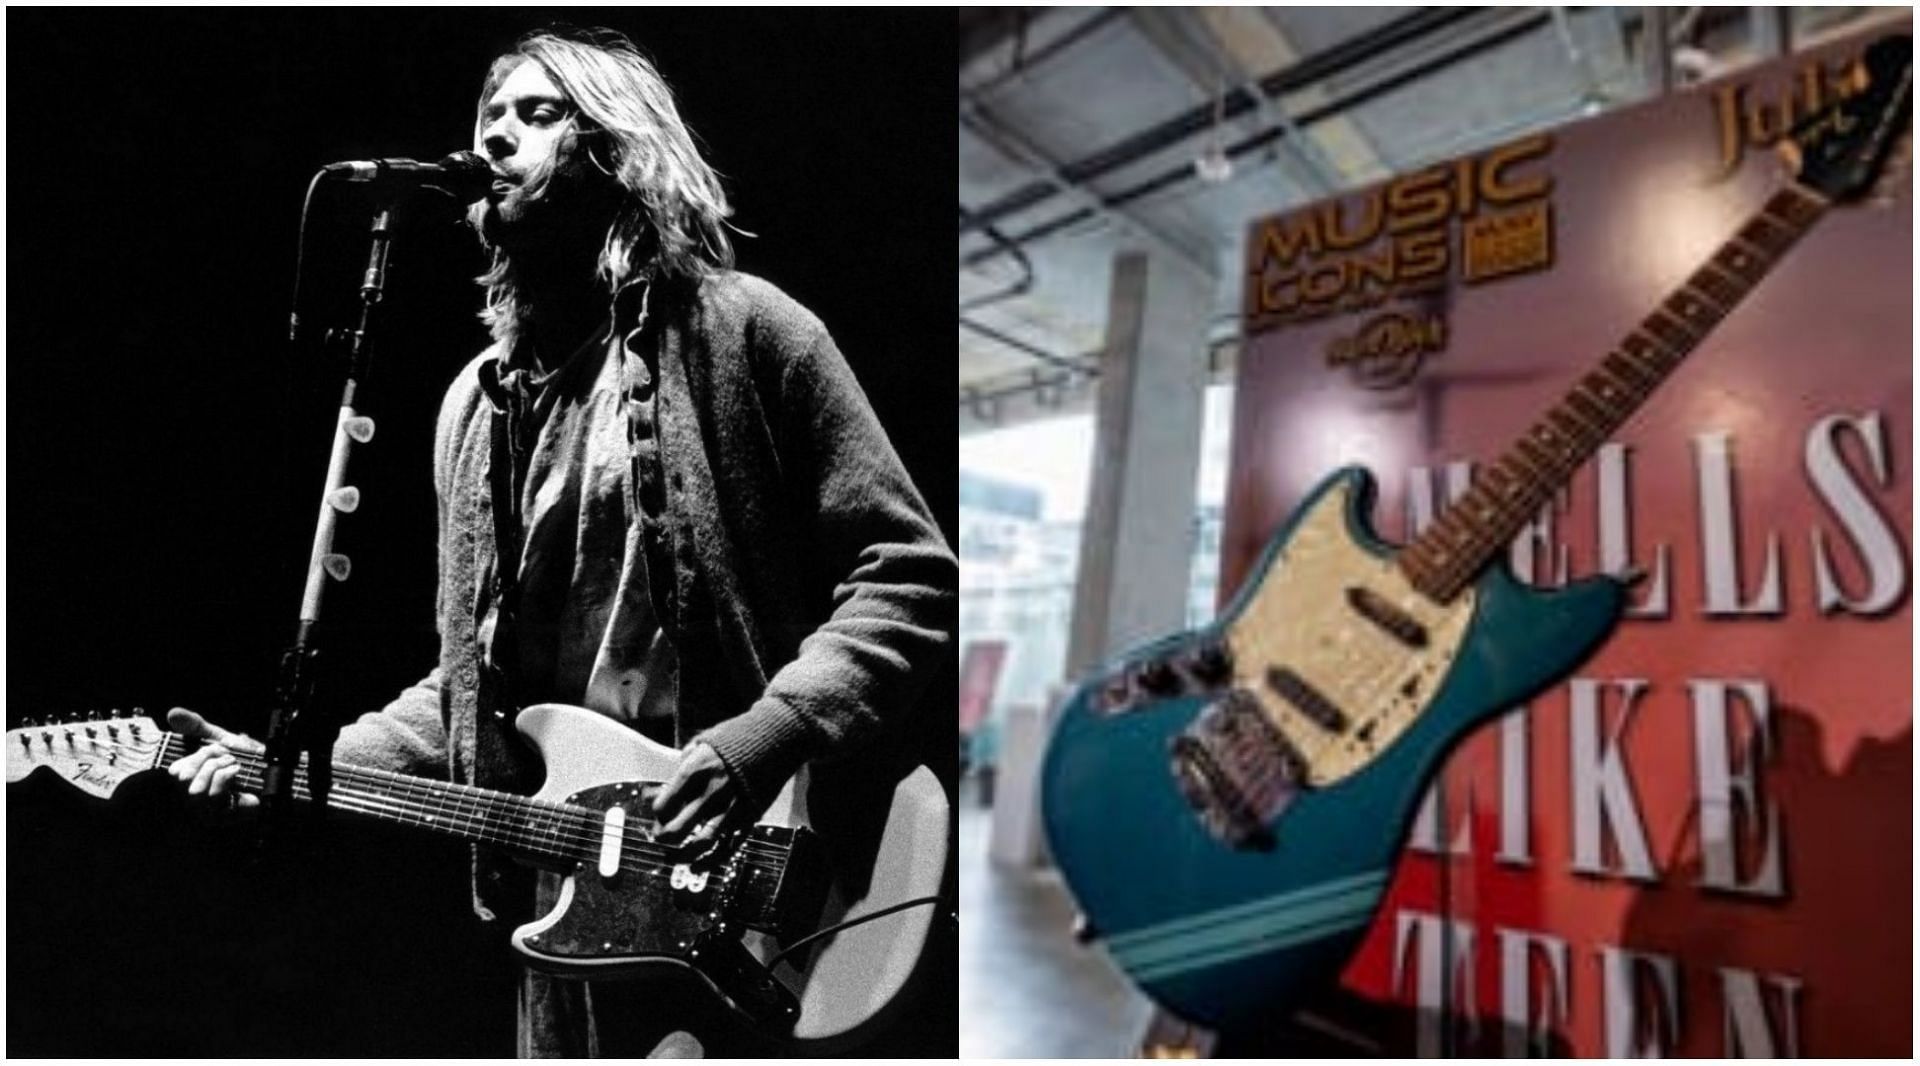 Late Nirvana frontman Kurt Cobain&#039;s guitar from &#039;Smells Like Teen Spirit&#039; is set to be auctioned. (Images via Getty/Julien&#039;s Auctions)